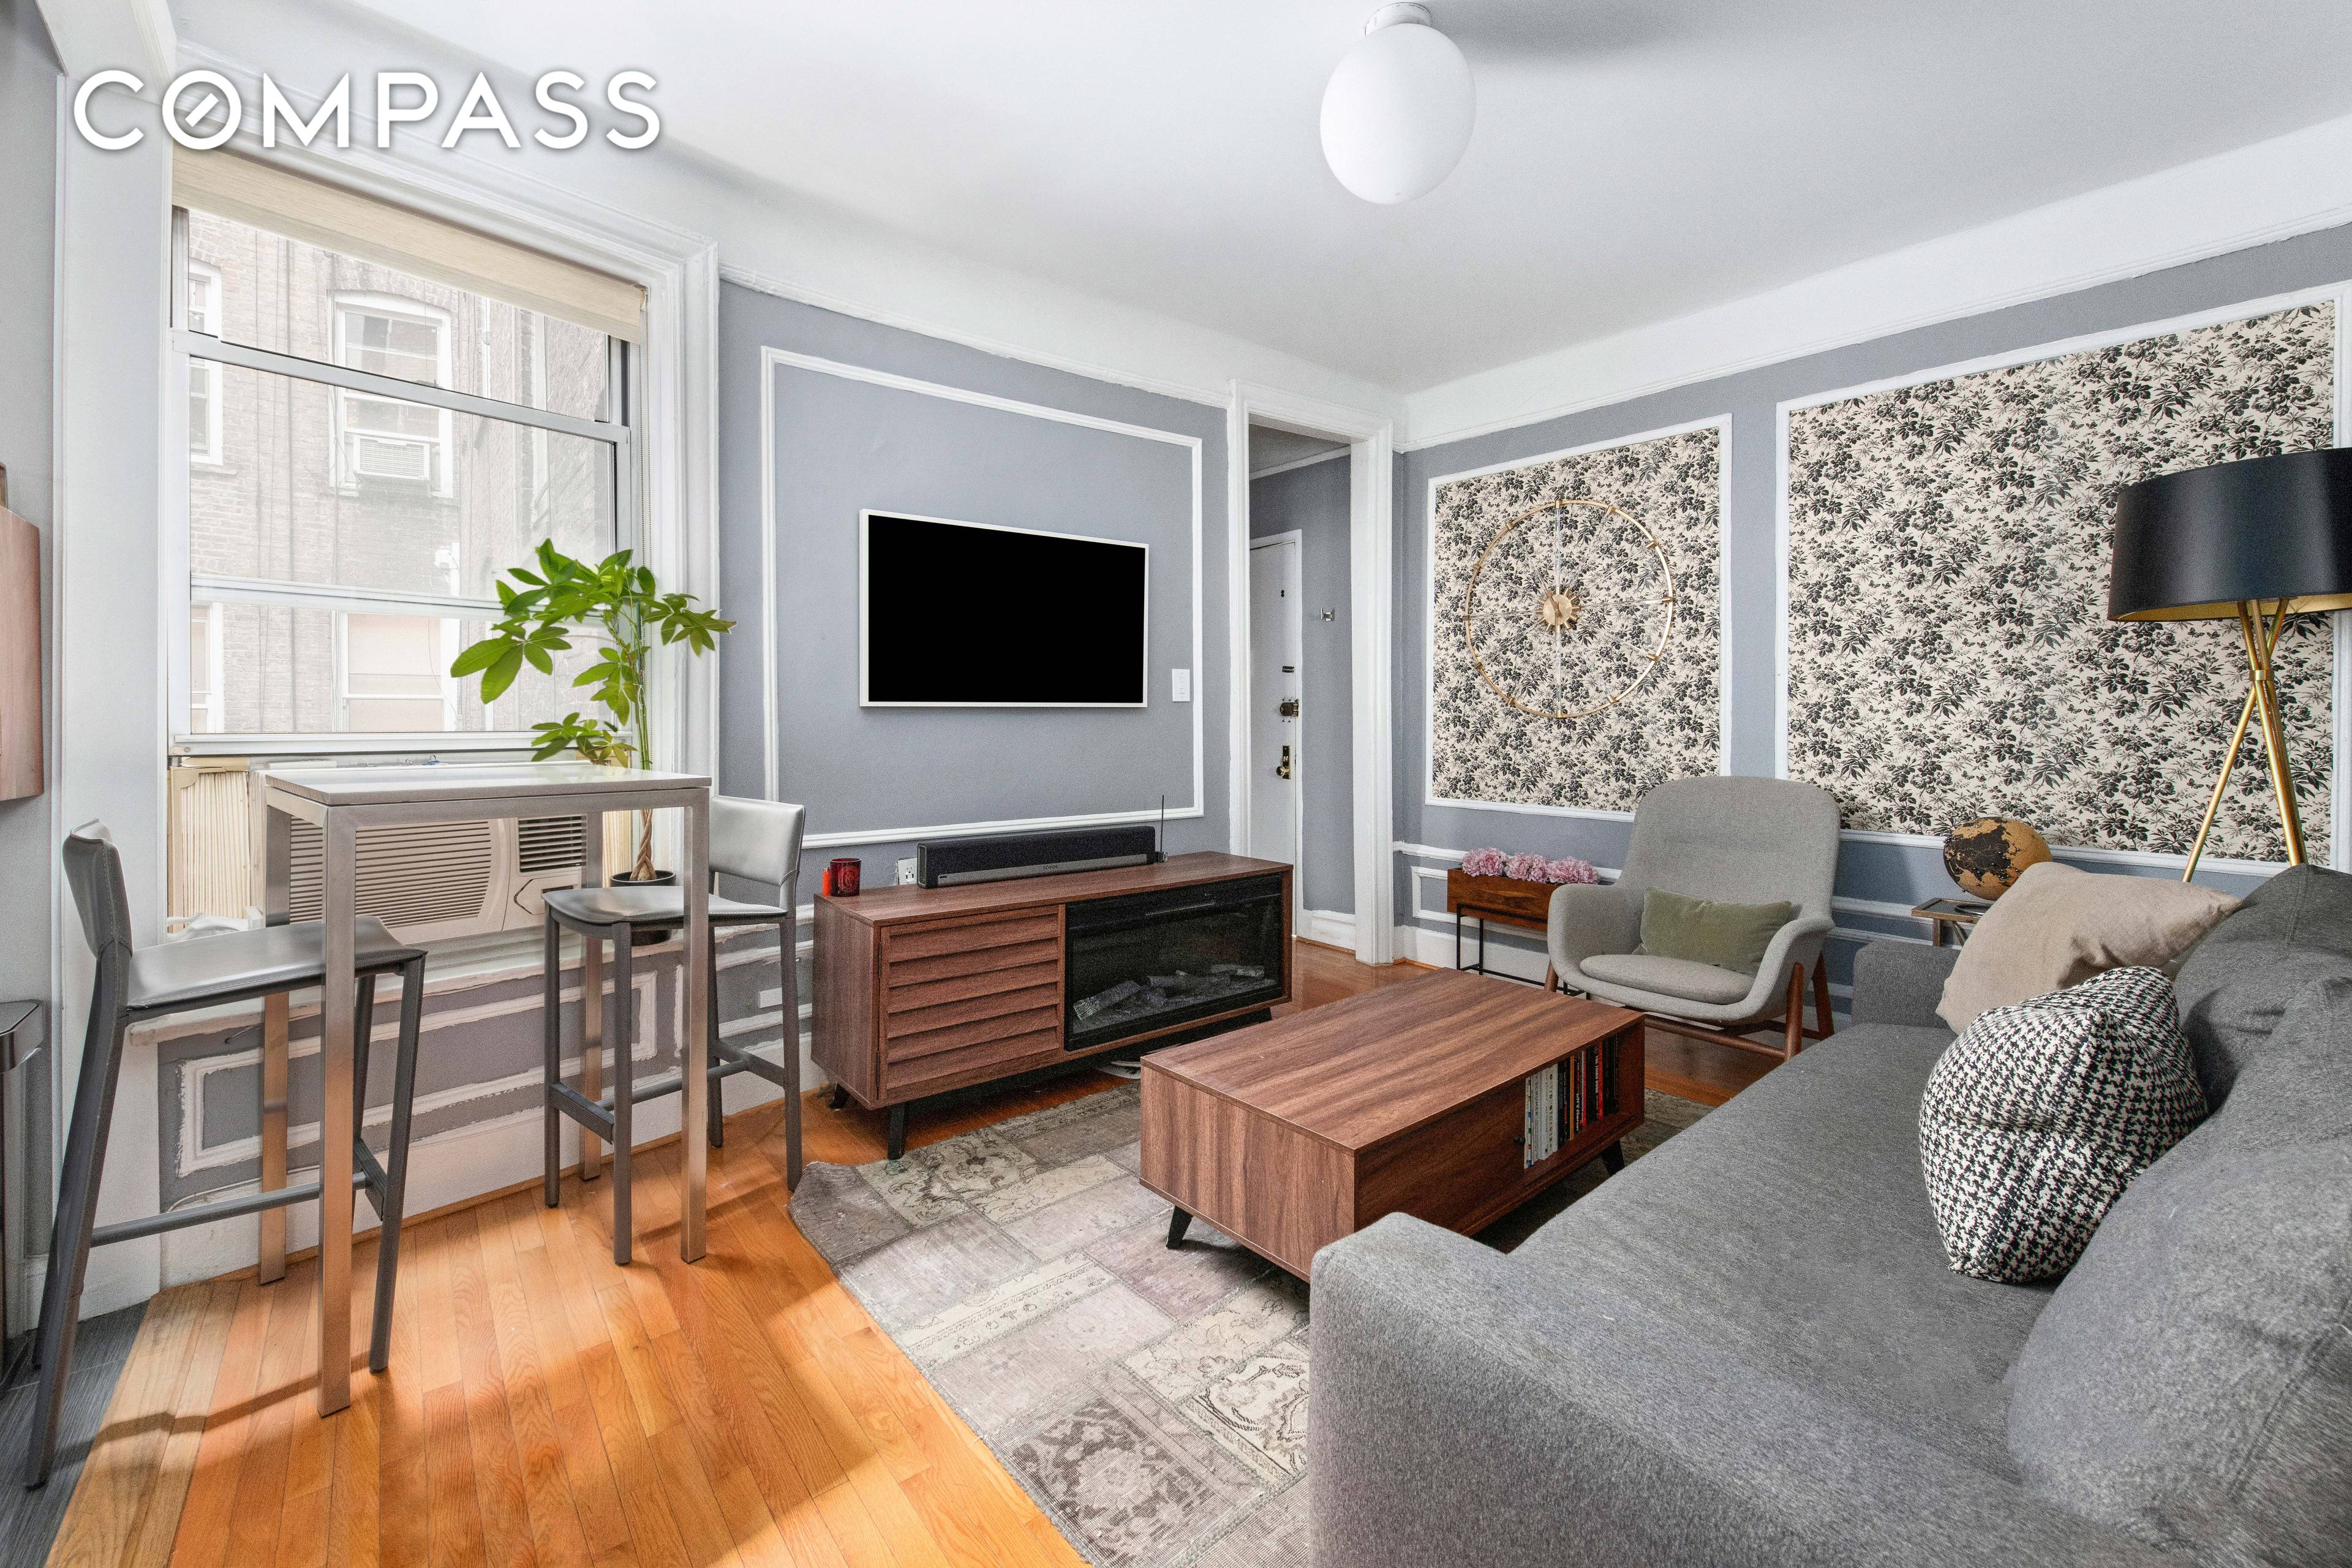 Showing by appointment only Welcome home to your one bedroom apartment located in the heart of Chelsea on the tree lined and shaded 22nd Street.